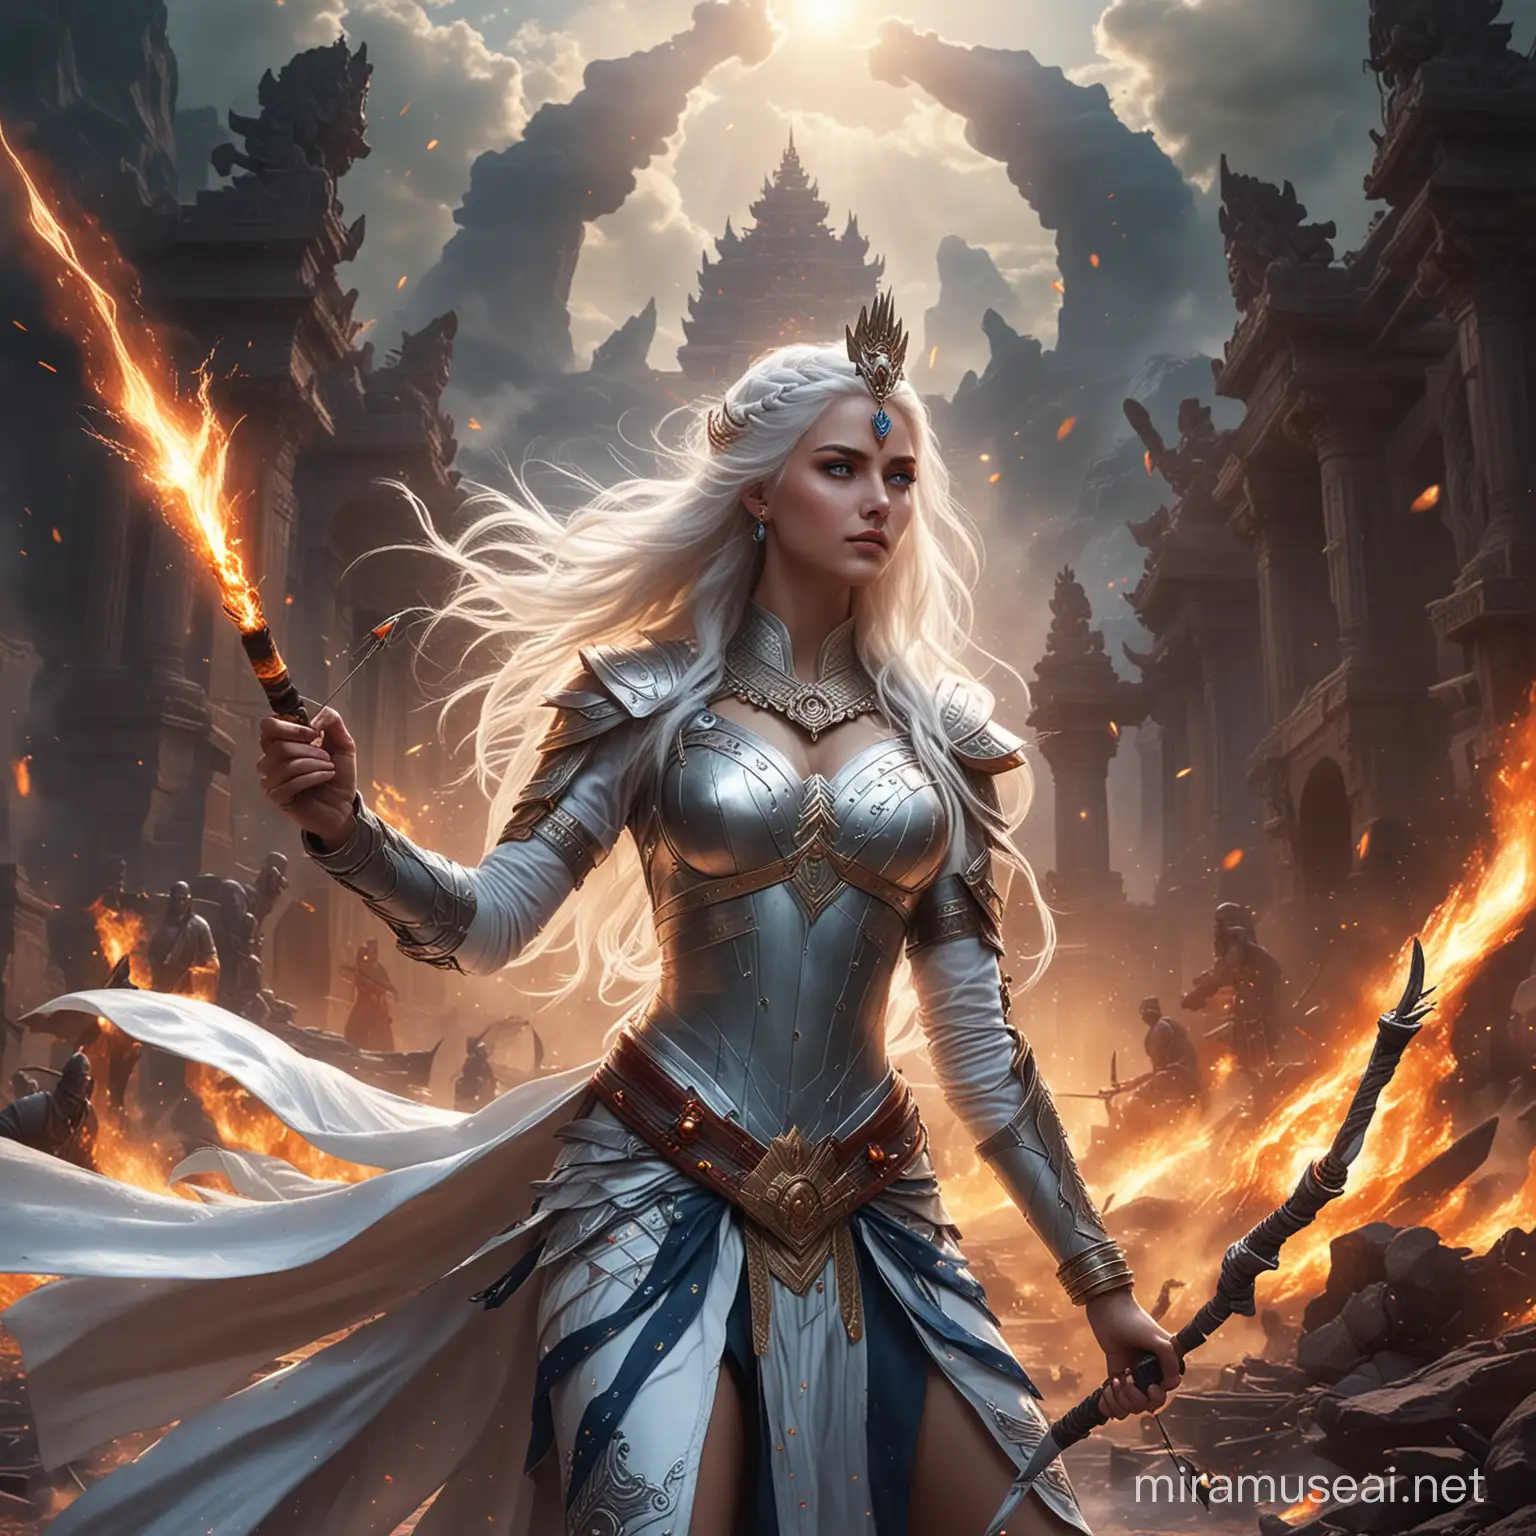 Powerful Young Empress Goddess in Combat with Fire and Lightning Against Hindu Demonic Forces